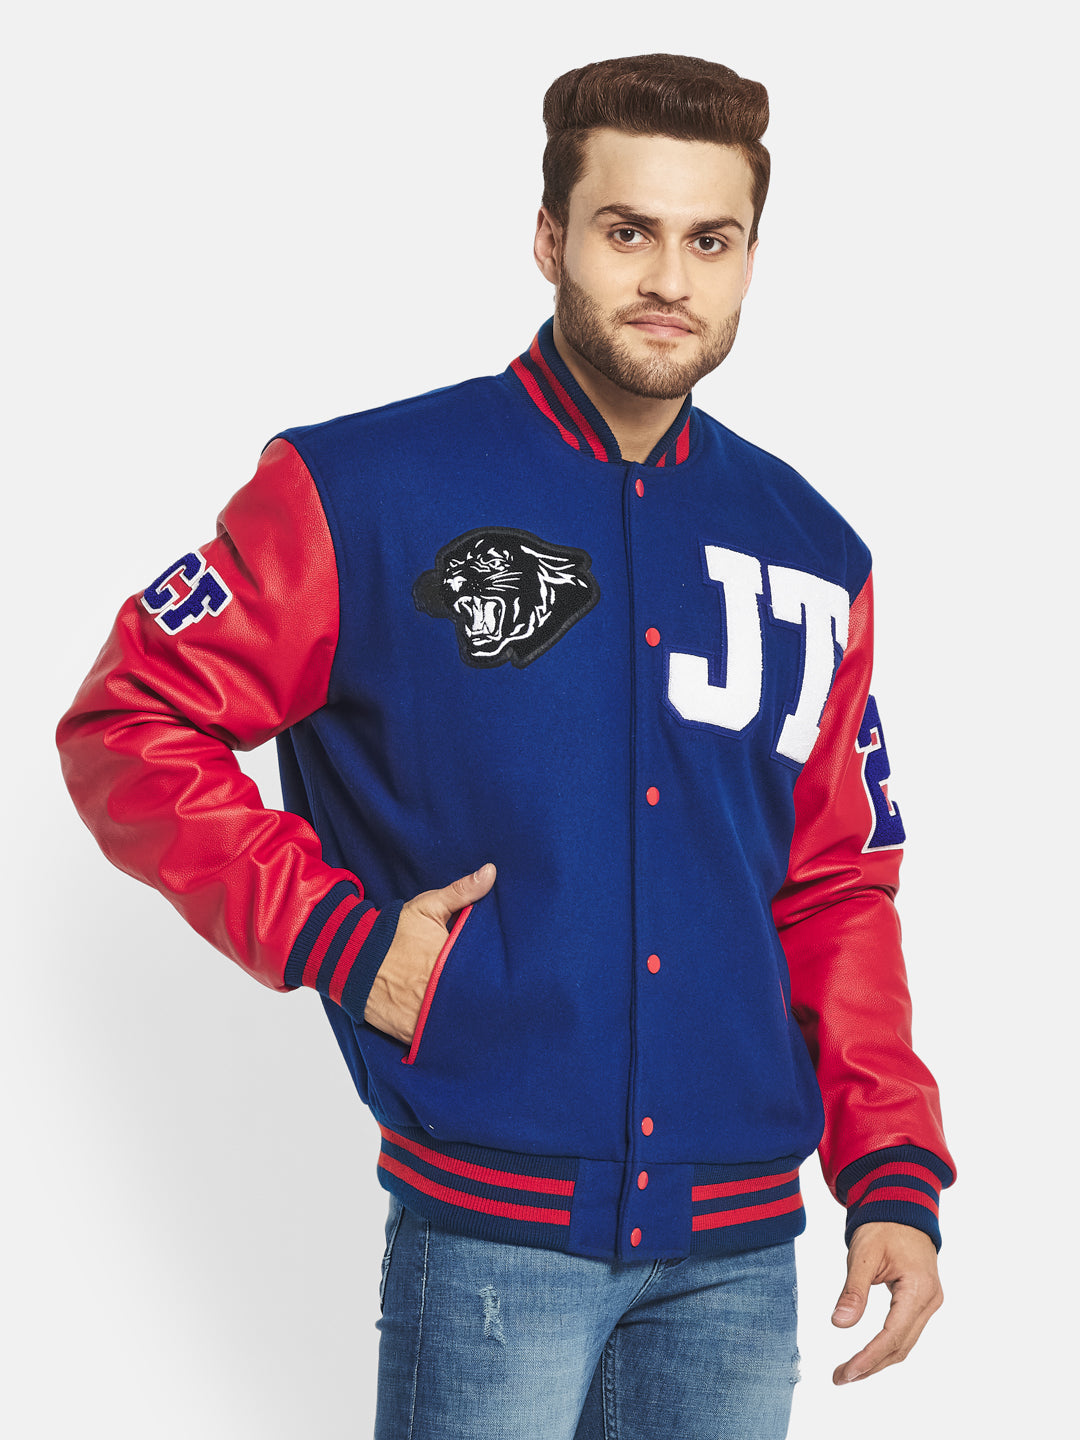 Mixed Blue and Red Lettermen Jacket